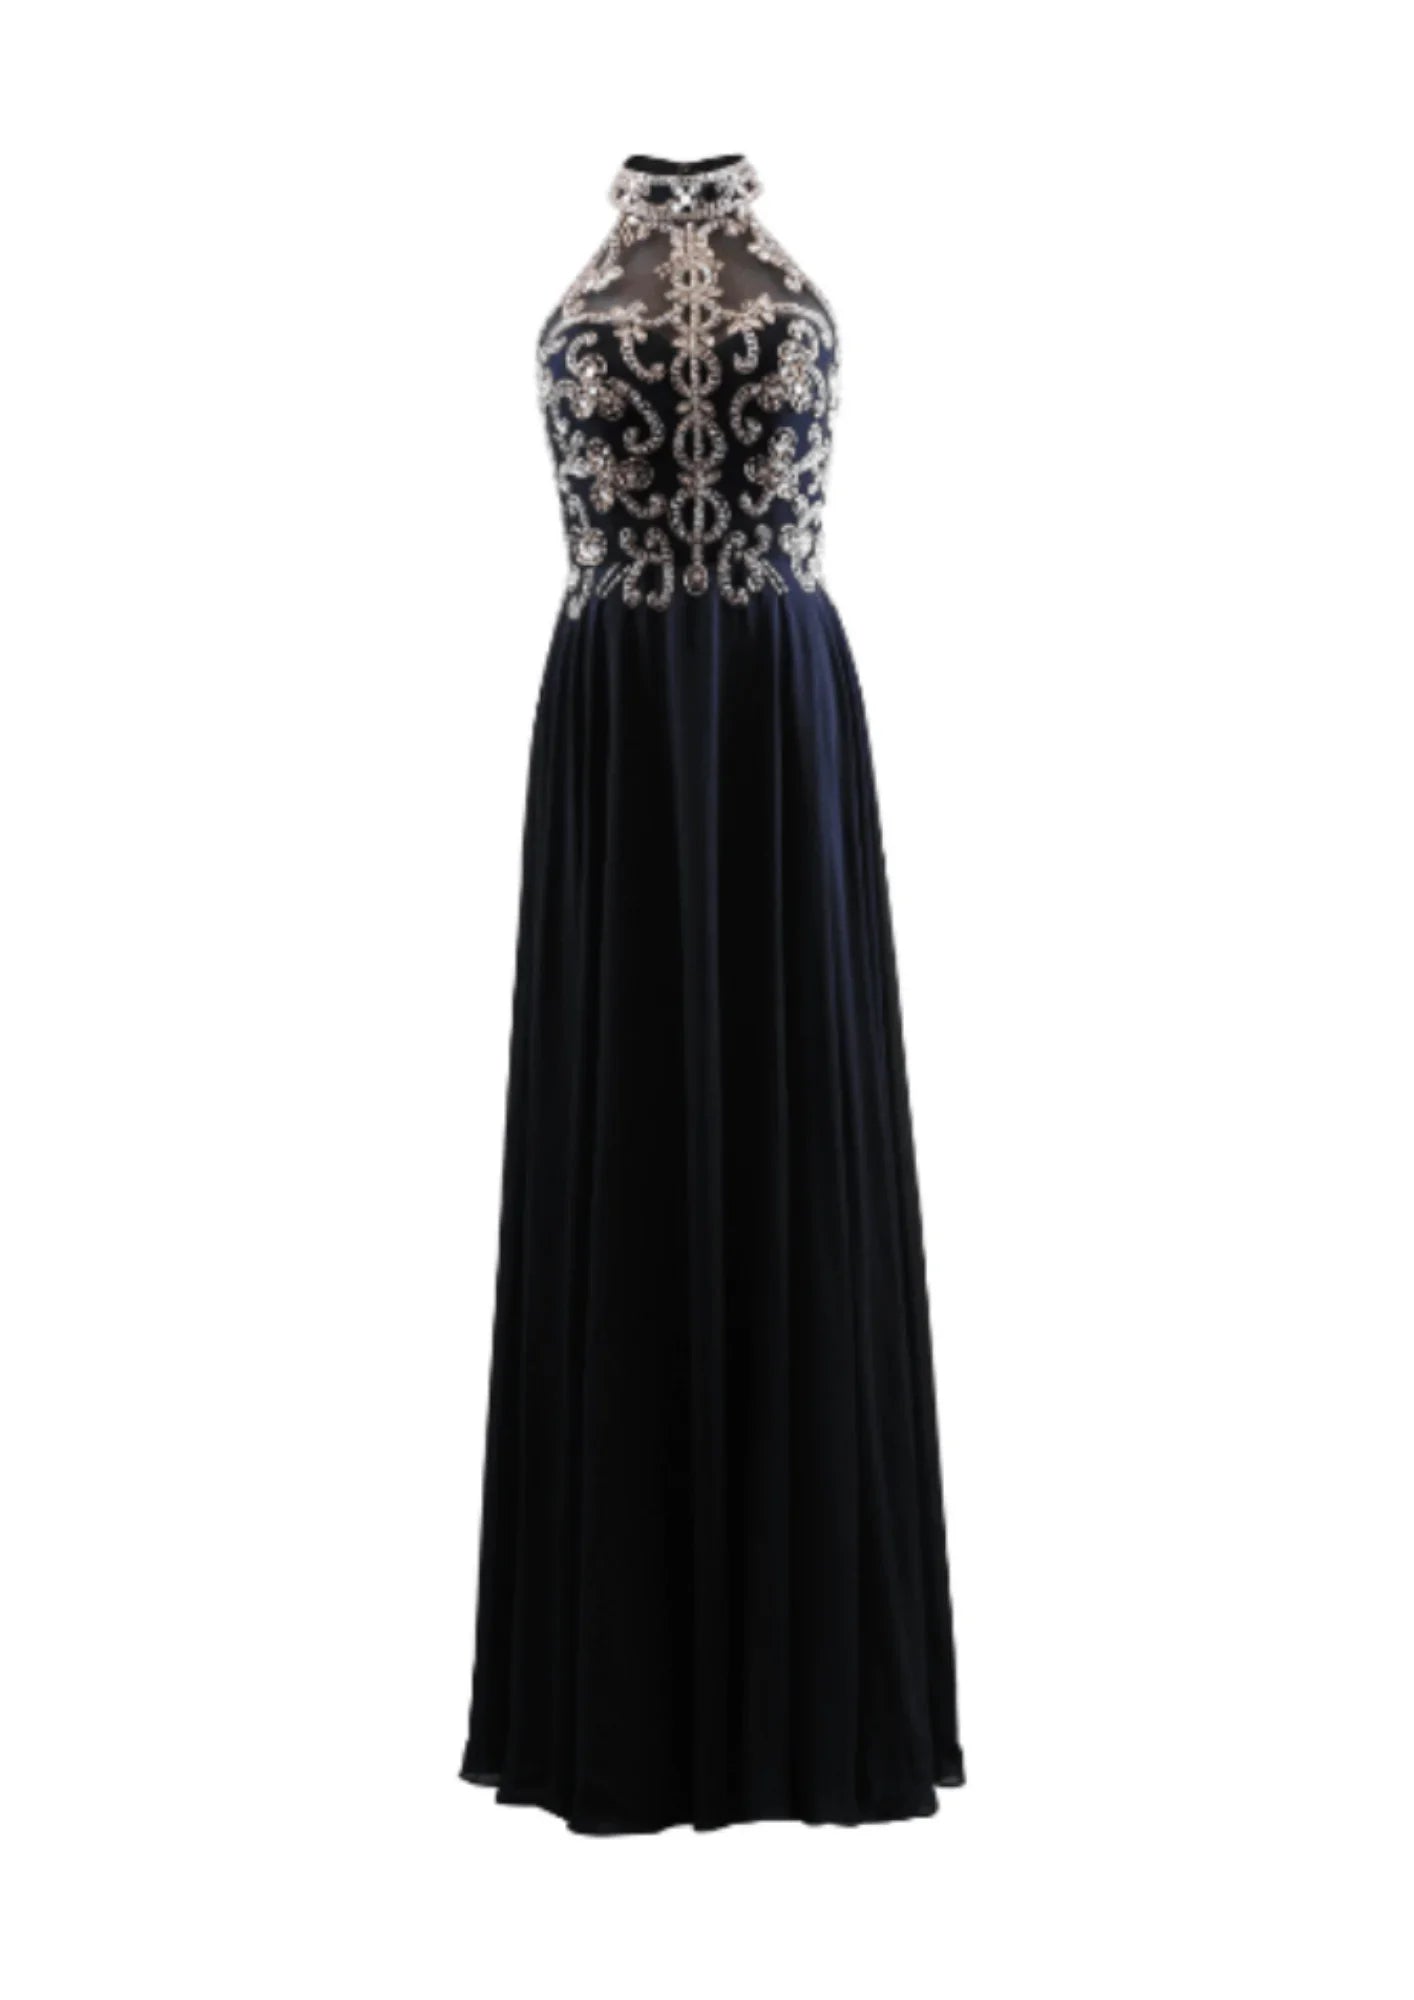 BLACK EVENING DRESS WITH SEQUINED DETAILS